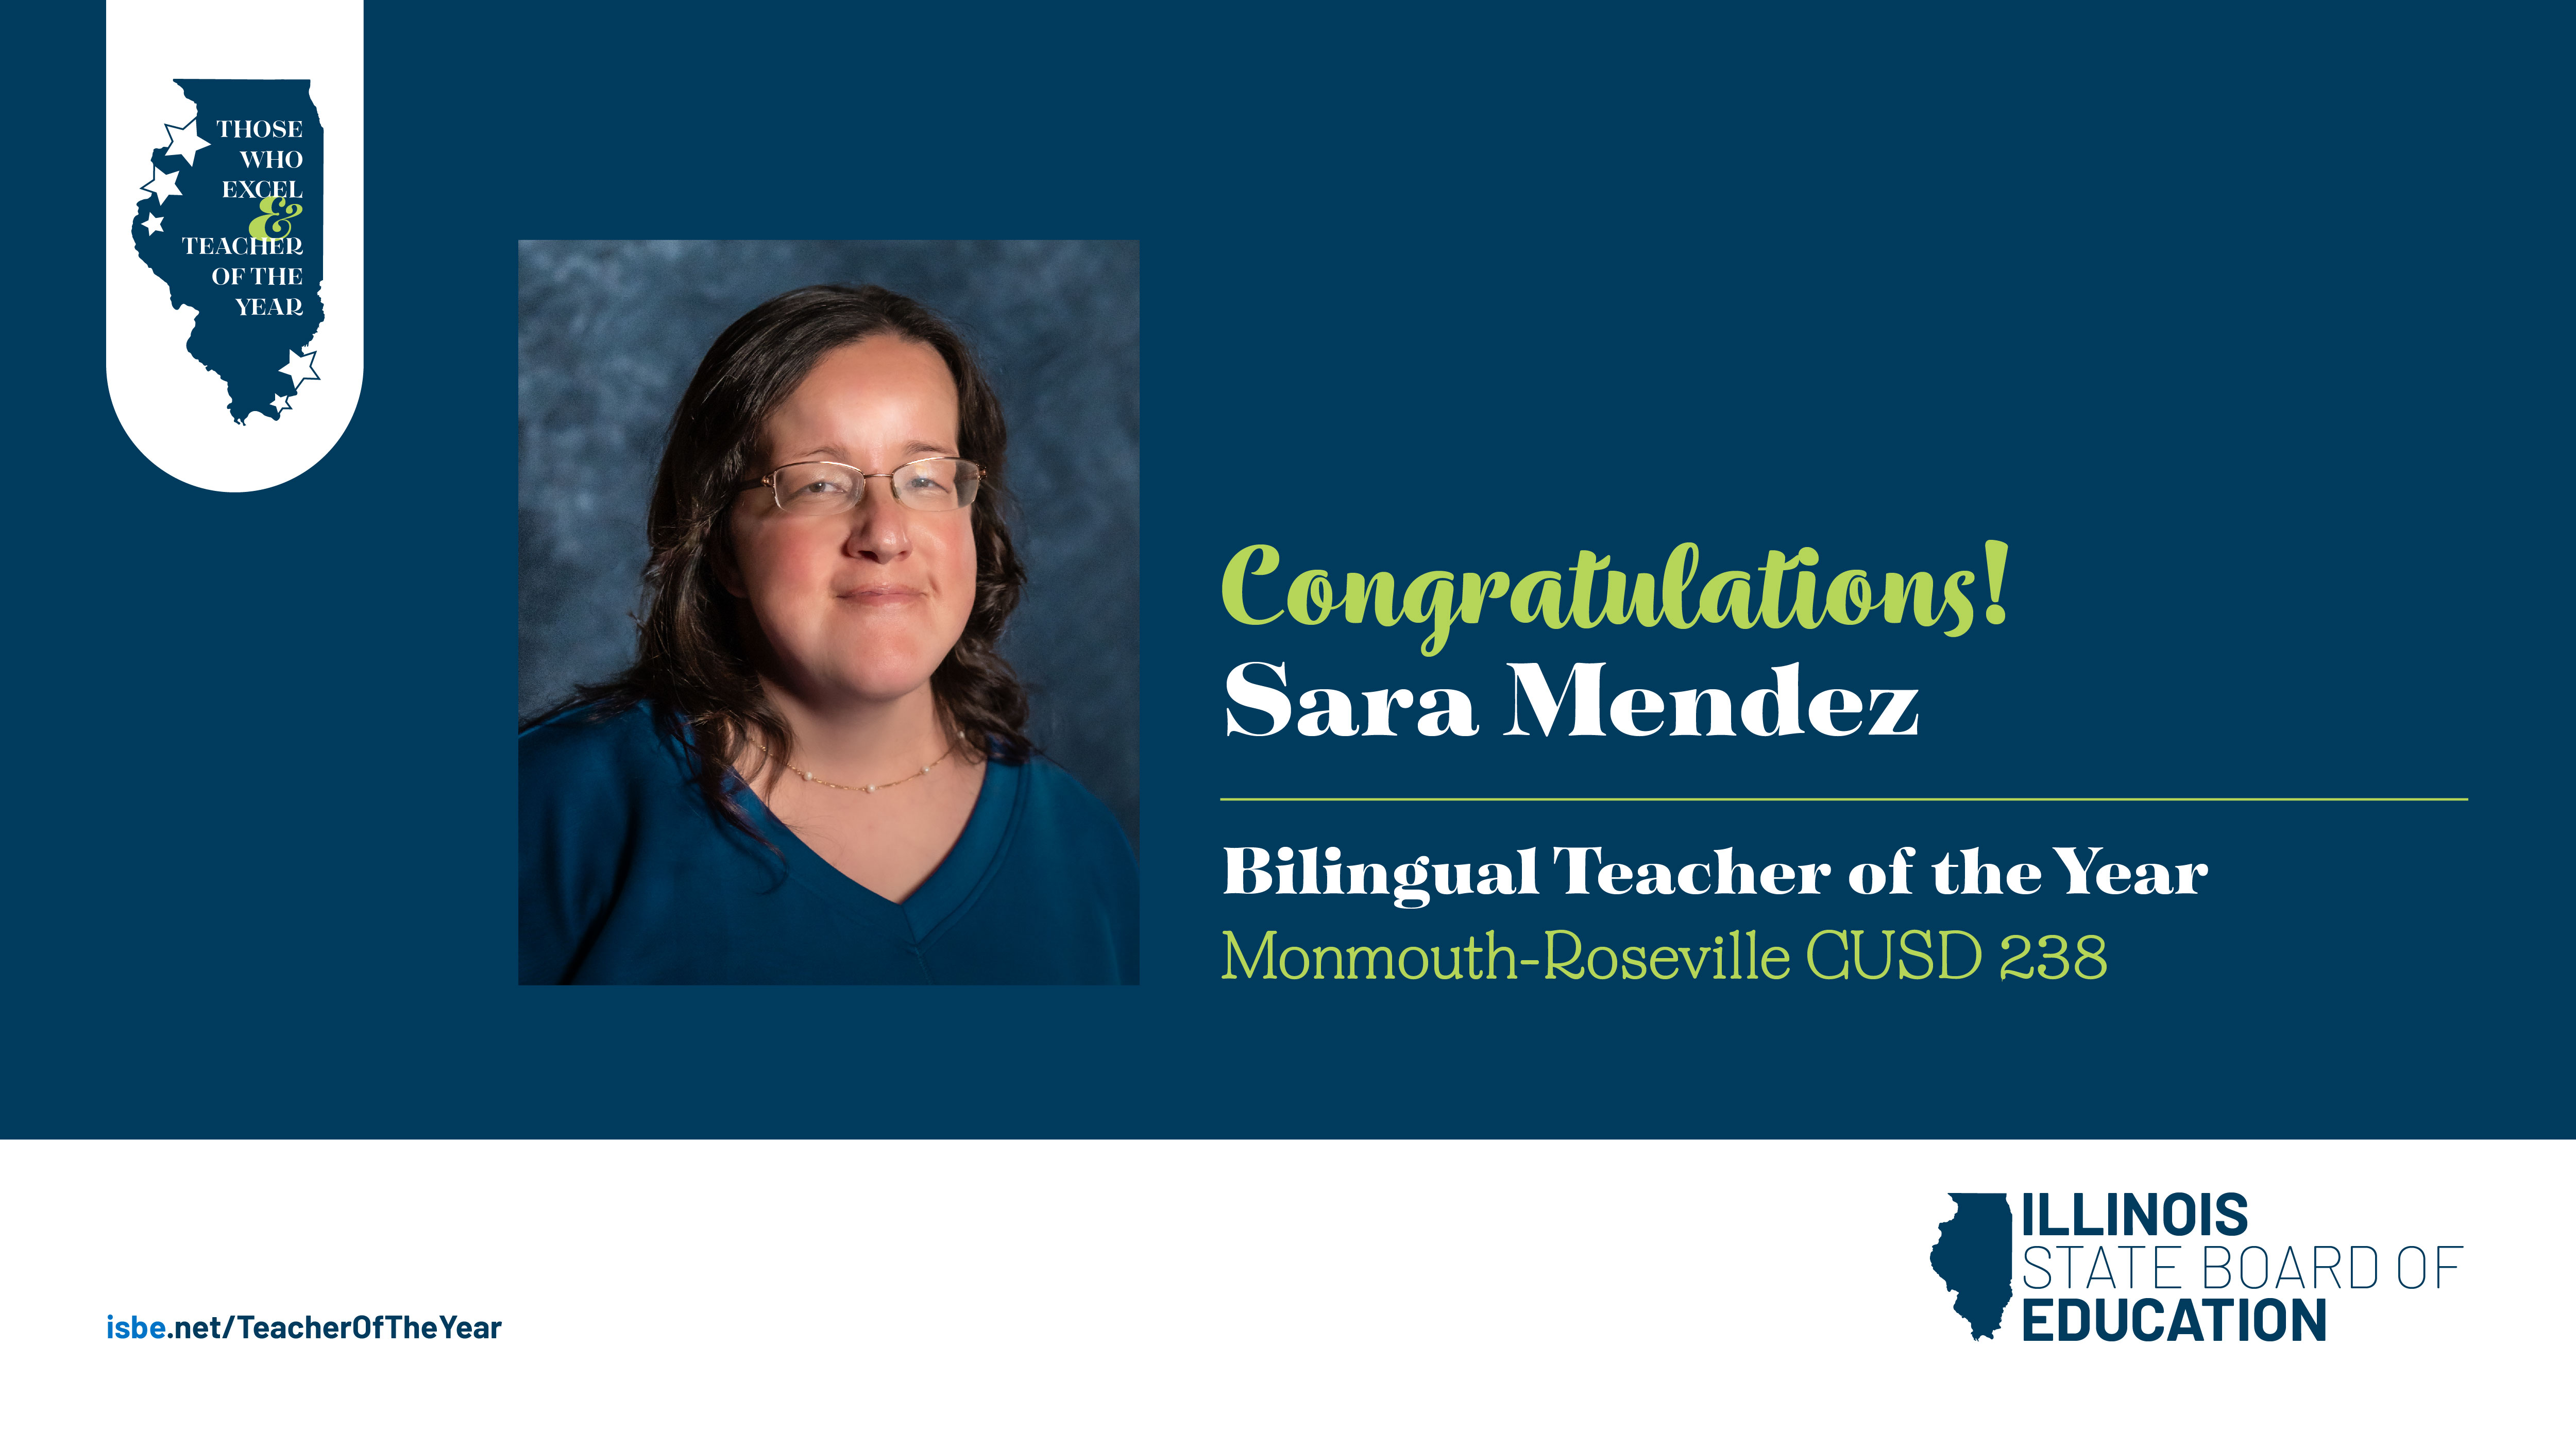 Congratulations to Sara Mendez, bilingual  teacher of the year from Monmouth-Roseville CUSD 238. Image is a headshot of Sara Mendez. ISBE logo.